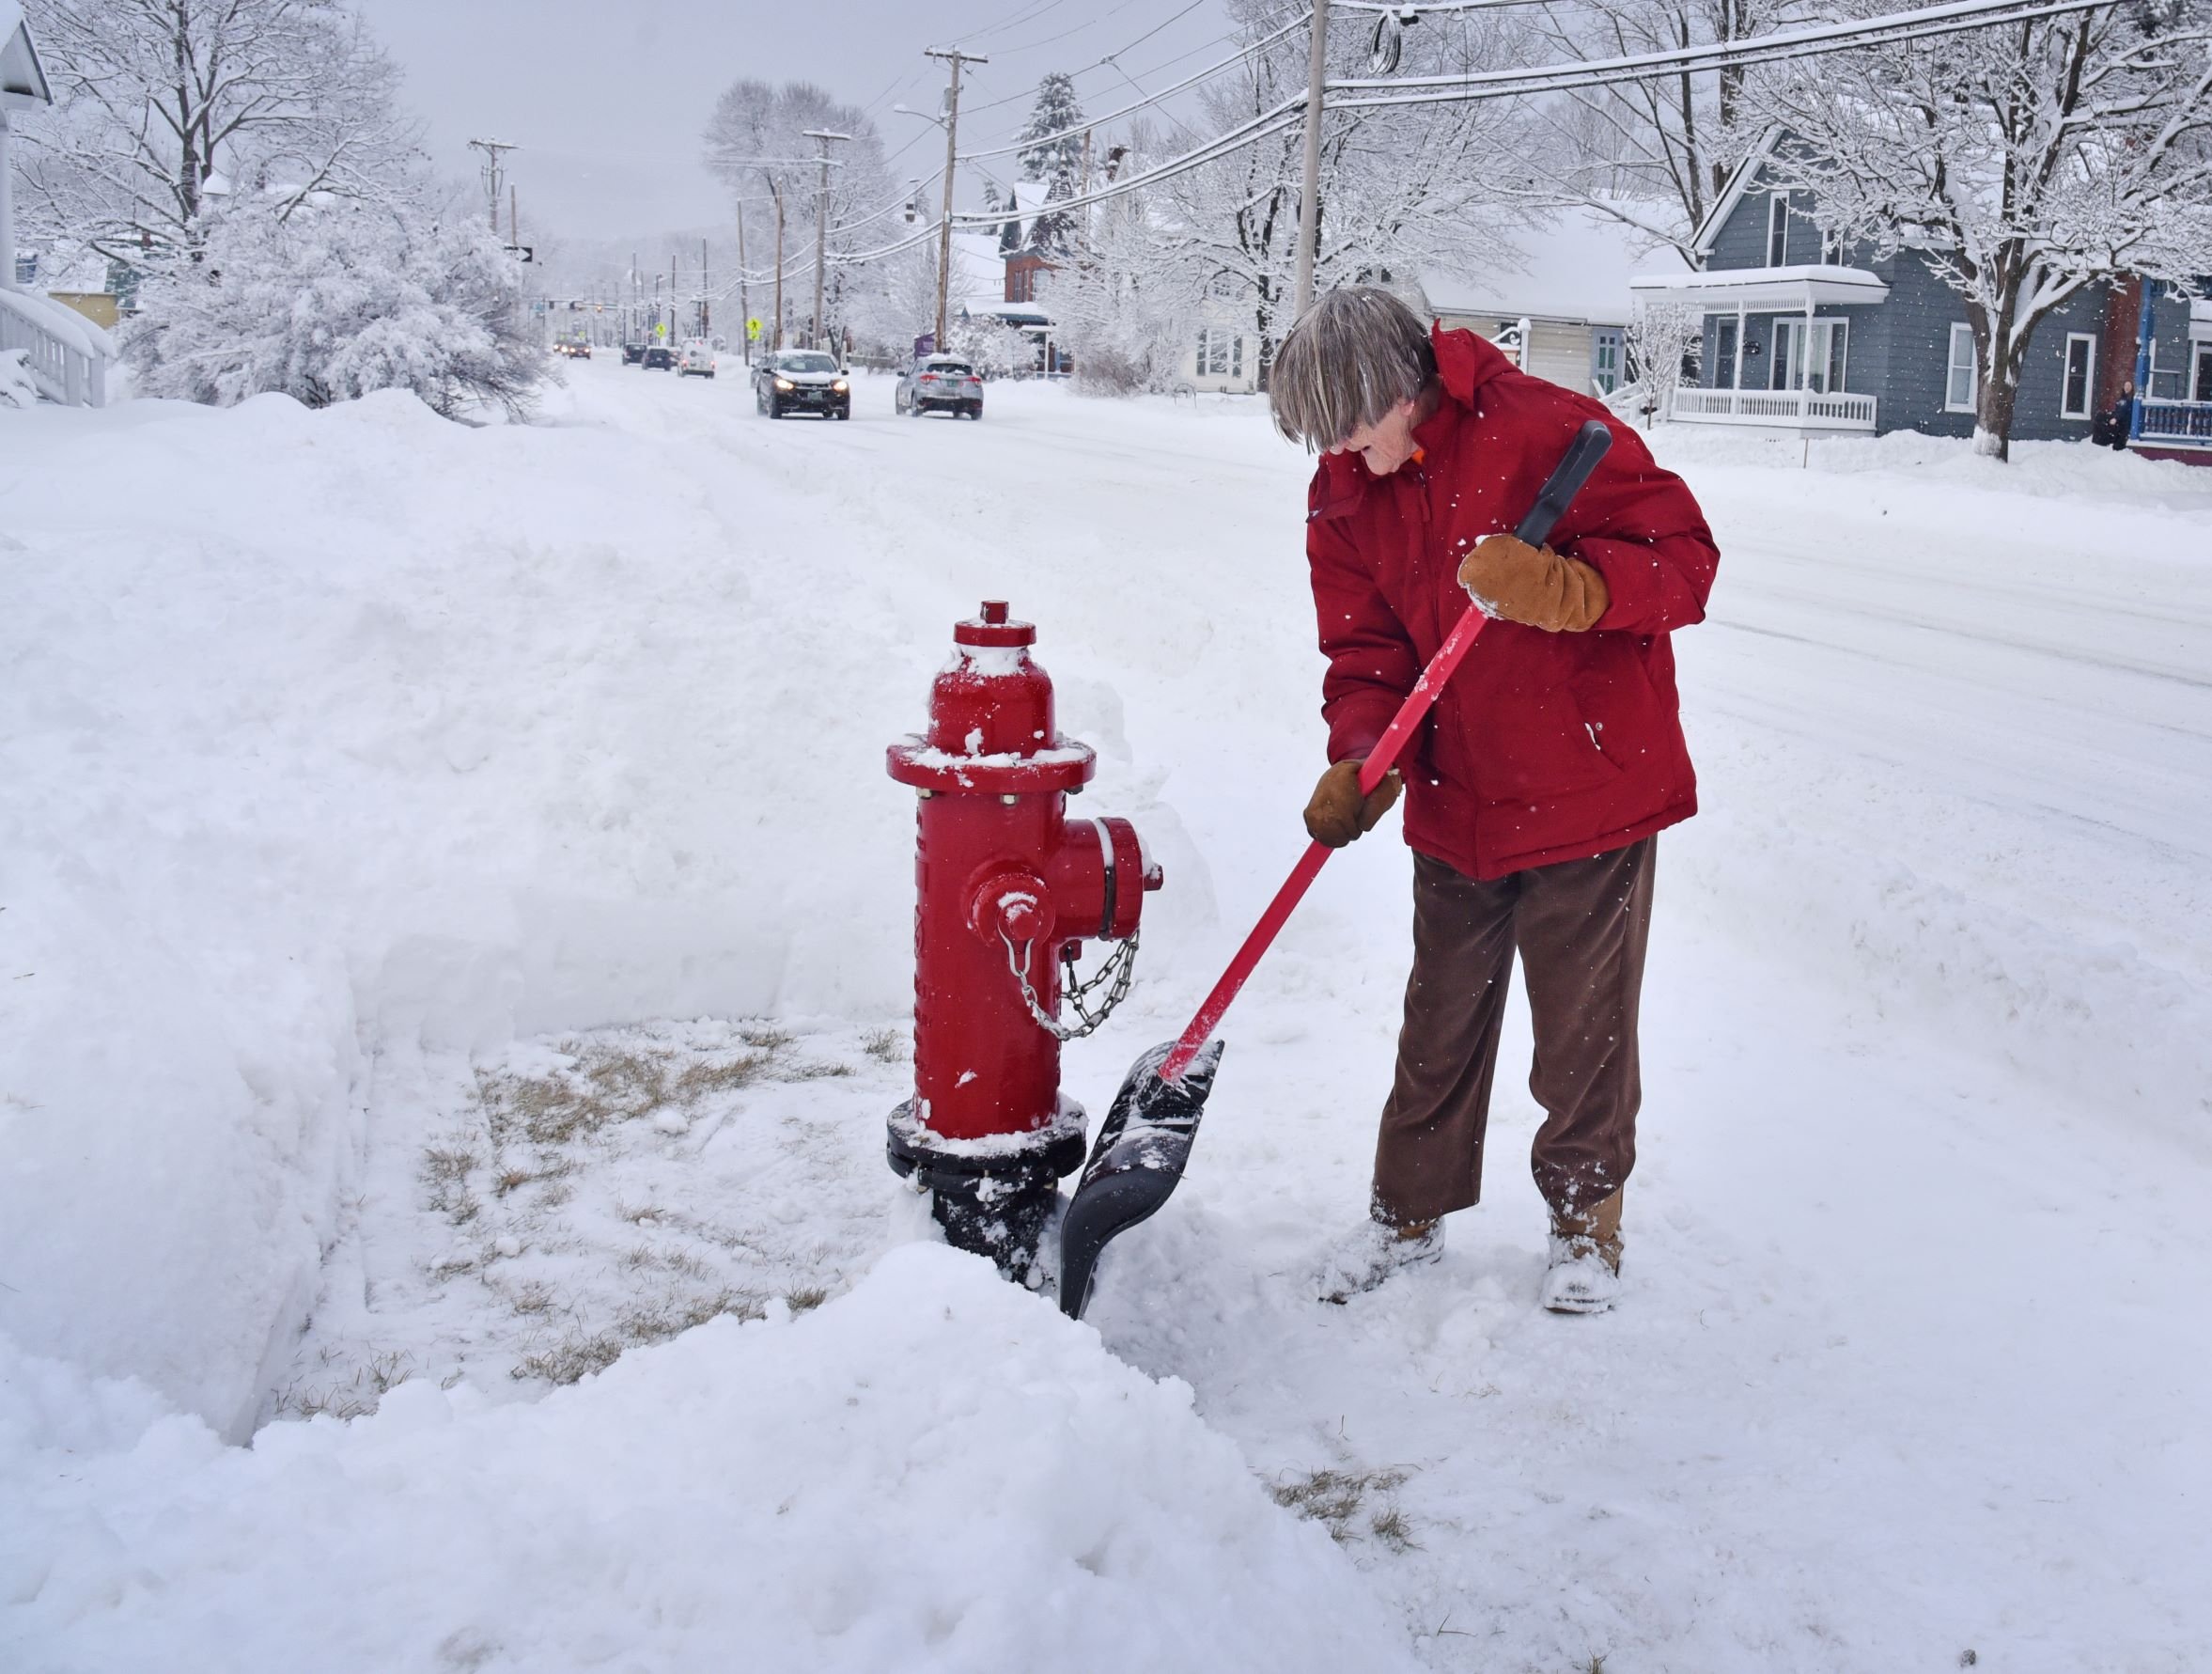  Shirley Boardman clears snow away from the fire hydrant on South Main Street near St. Andrew's Church. Photo by Gordon Miller 